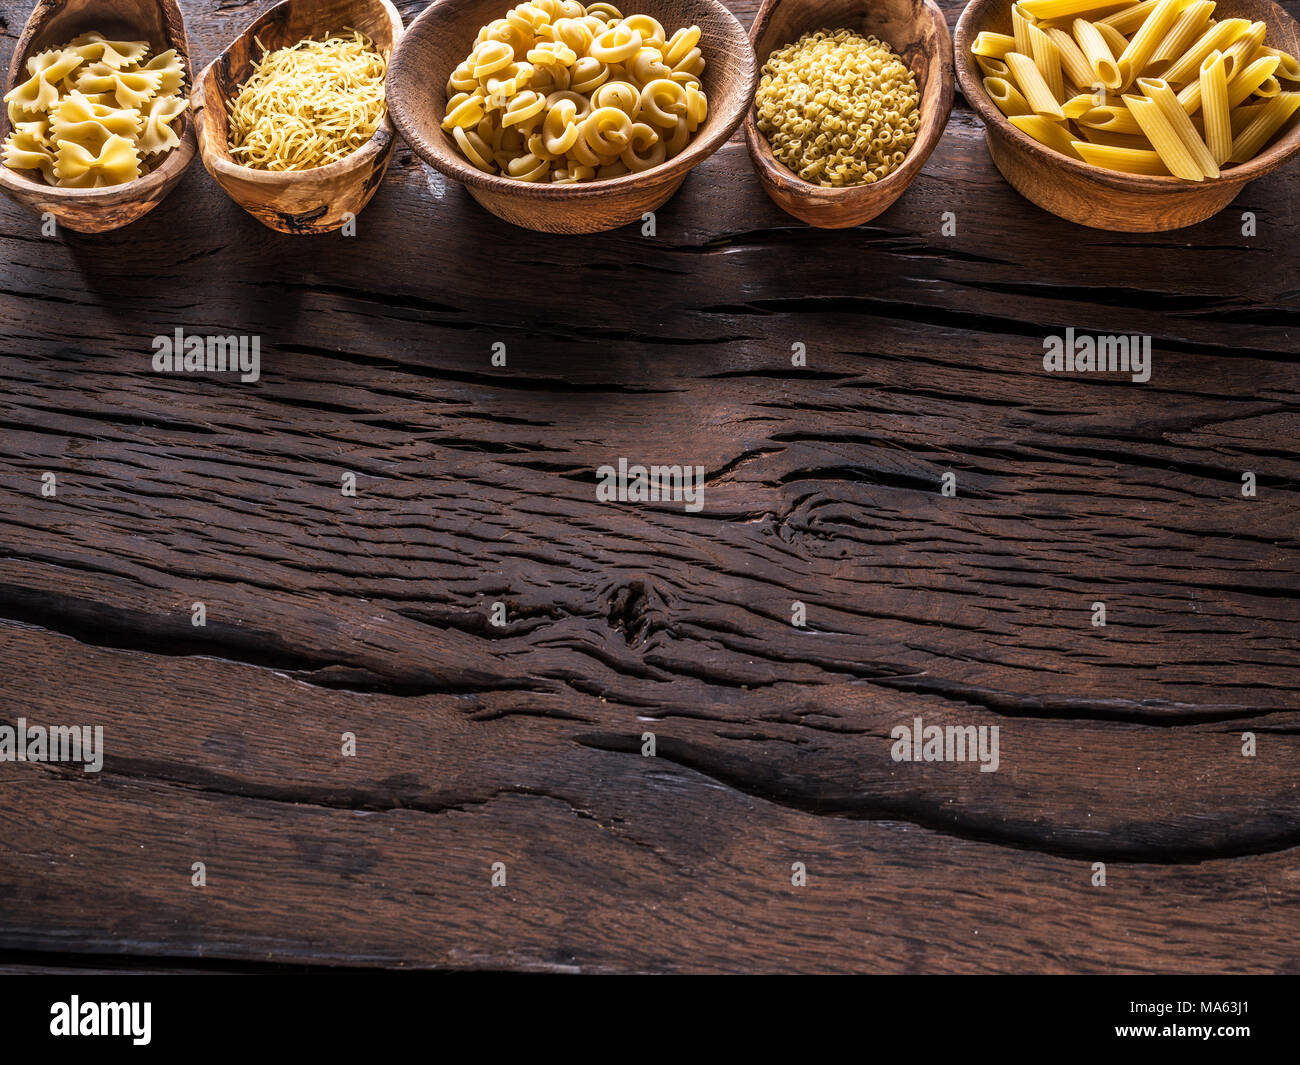 Different pasta types in wooden bowls on the table. Top view. Stock Photo